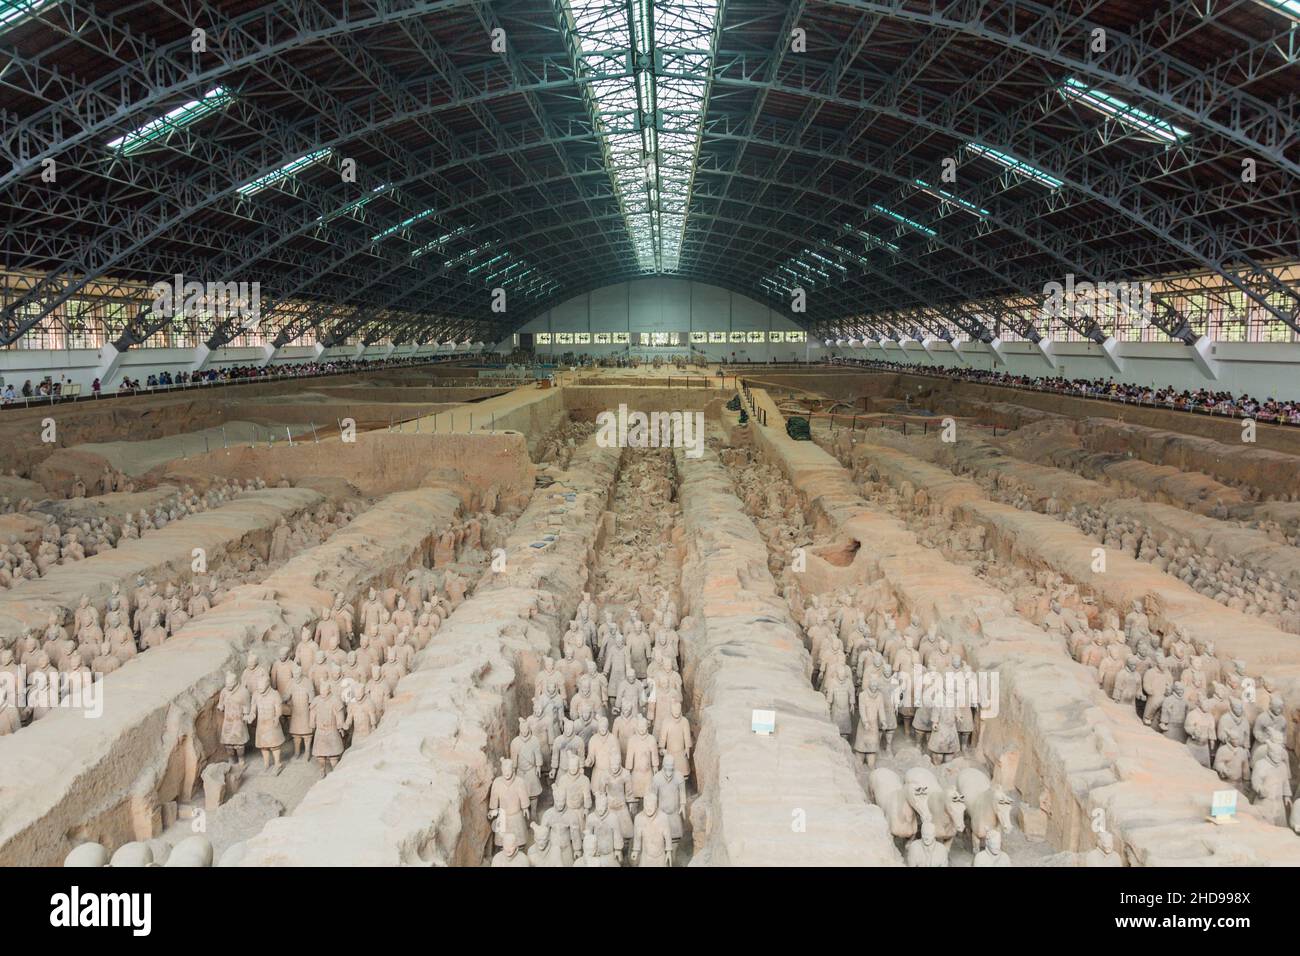 XI'AN, CHINA - AUGUST 6, 2018: View of the Pit 1 of the Army of Terracotta Warriors near Xi'an, Shaanxi province, China Stock Photo